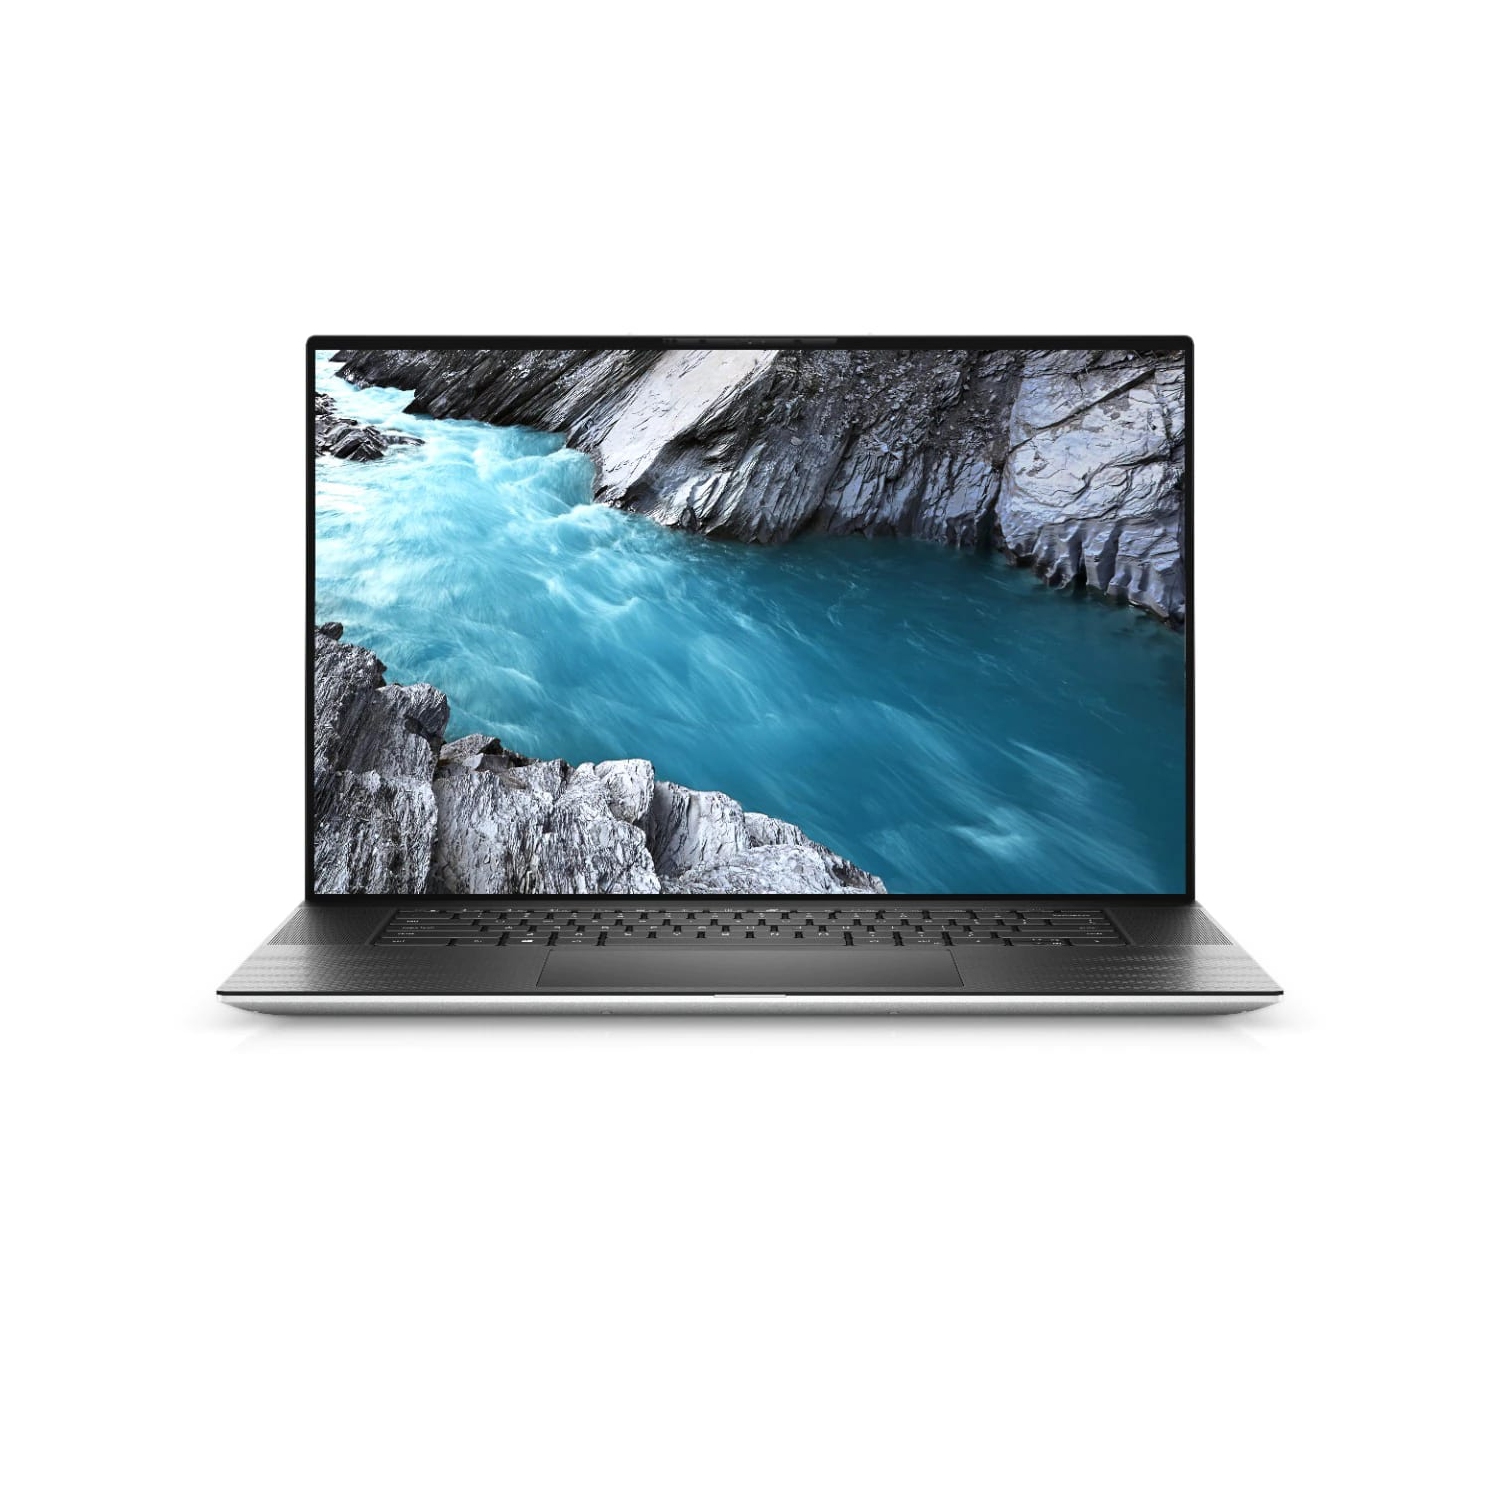 Refurbished (Excellent) - Dell XPS 17 9700 Laptop (2020) | 17" 4K Touch | Core i7 - 1TB SSD - 64GB RAM - RTX 2060 | 8 Cores @ 5.1 GHz - 10th Gen CPU Certified Refurbished